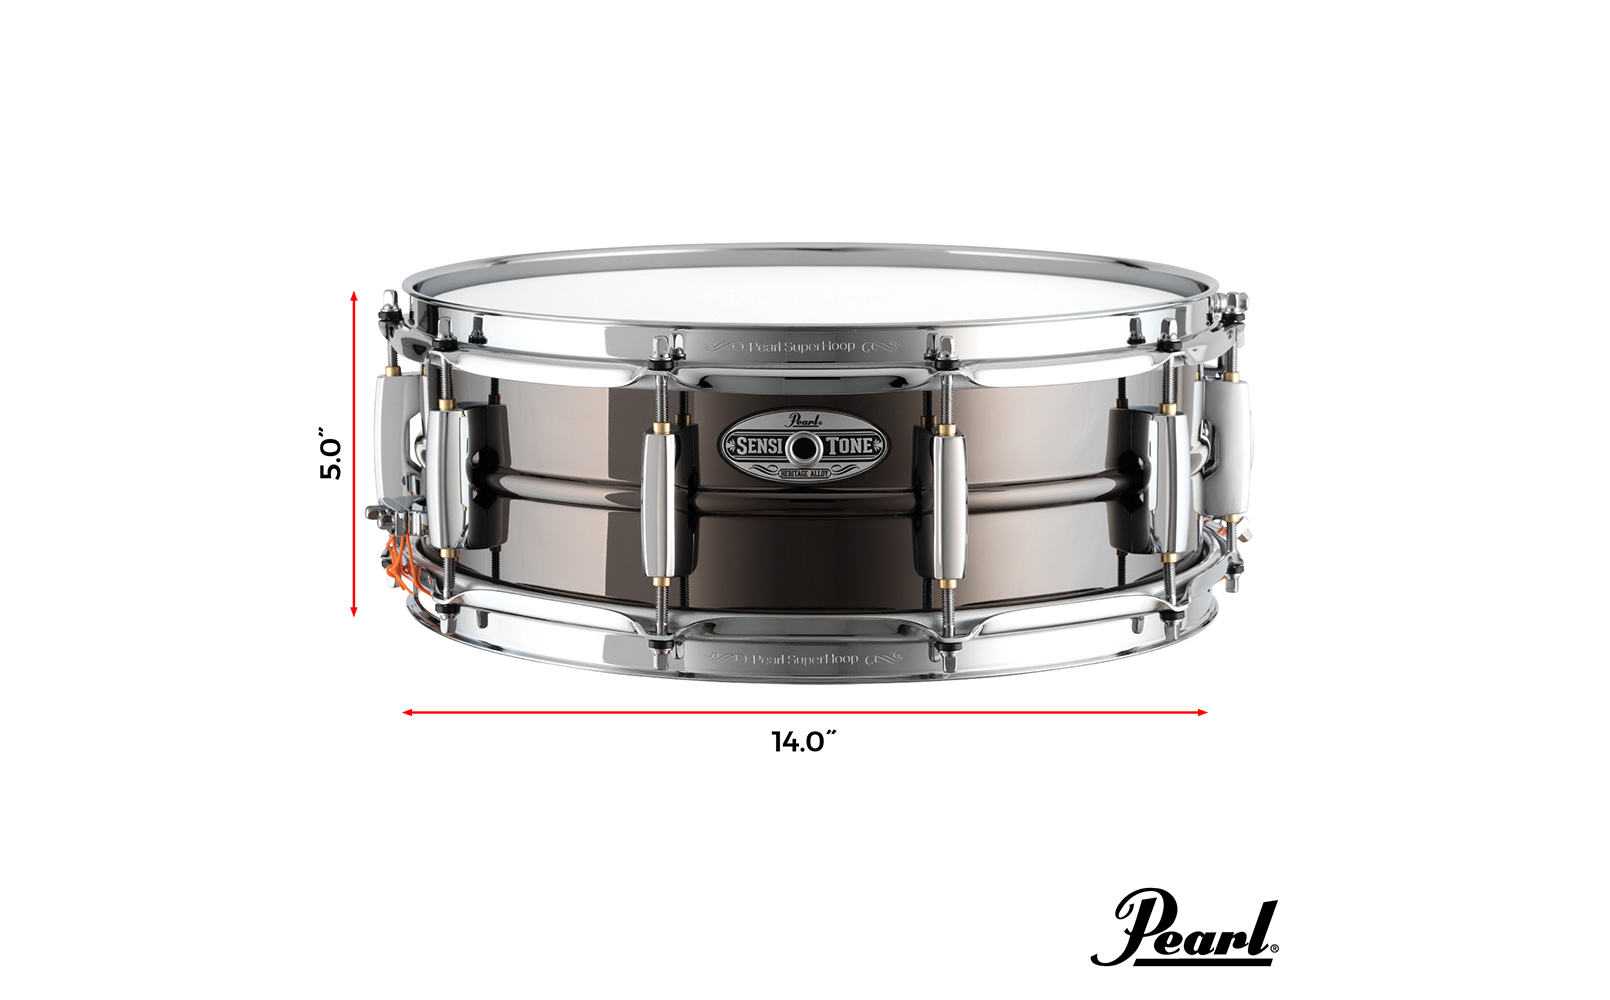 NEW Pearl Sensitone Heritage Alloy Snare Drum Review 